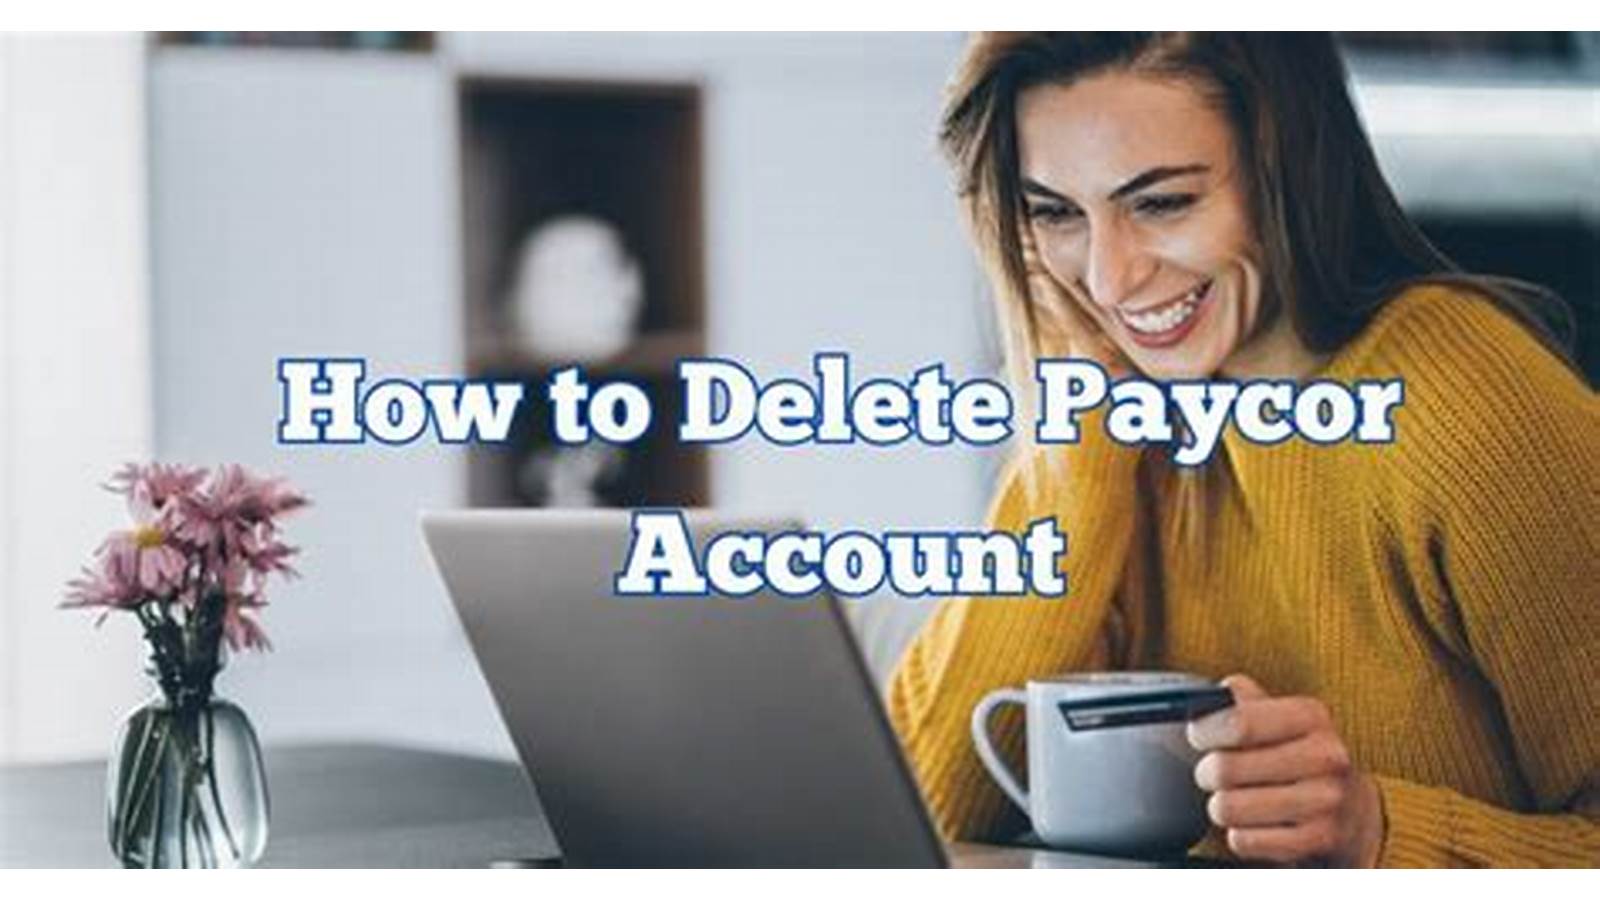 Deleting Paycor Account